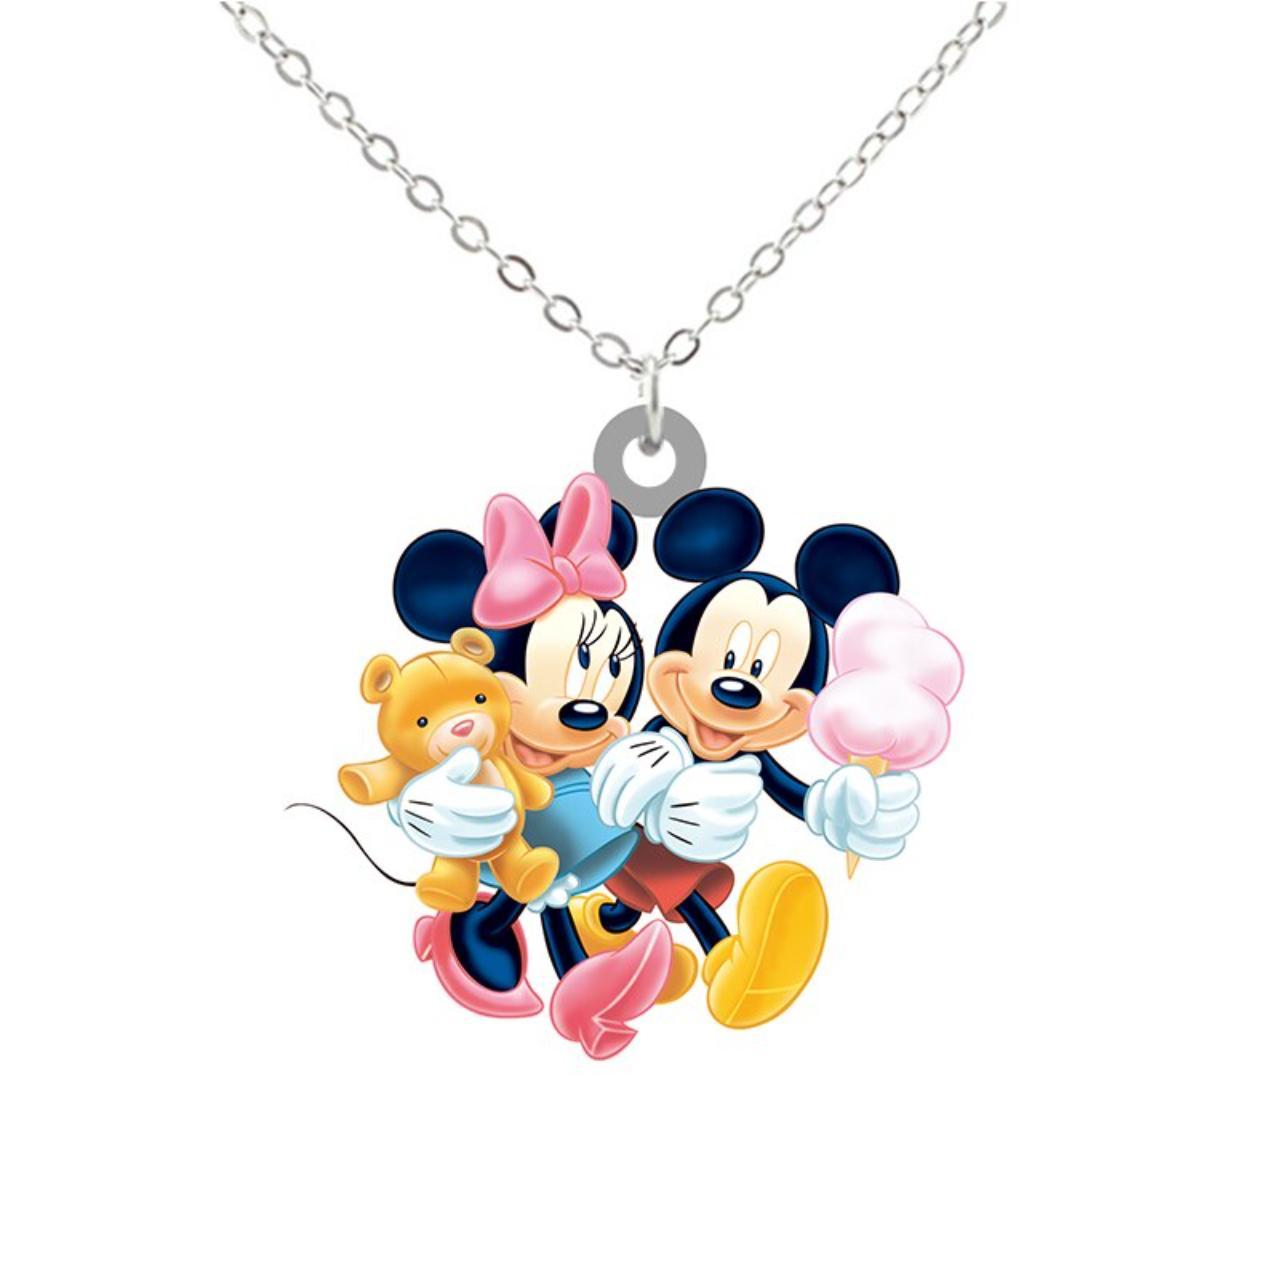 Stainless Steel Necklaces Mickey Mouse | Stainless Steel Necklace Earrings  Set - Jewelry Sets - Aliexpress